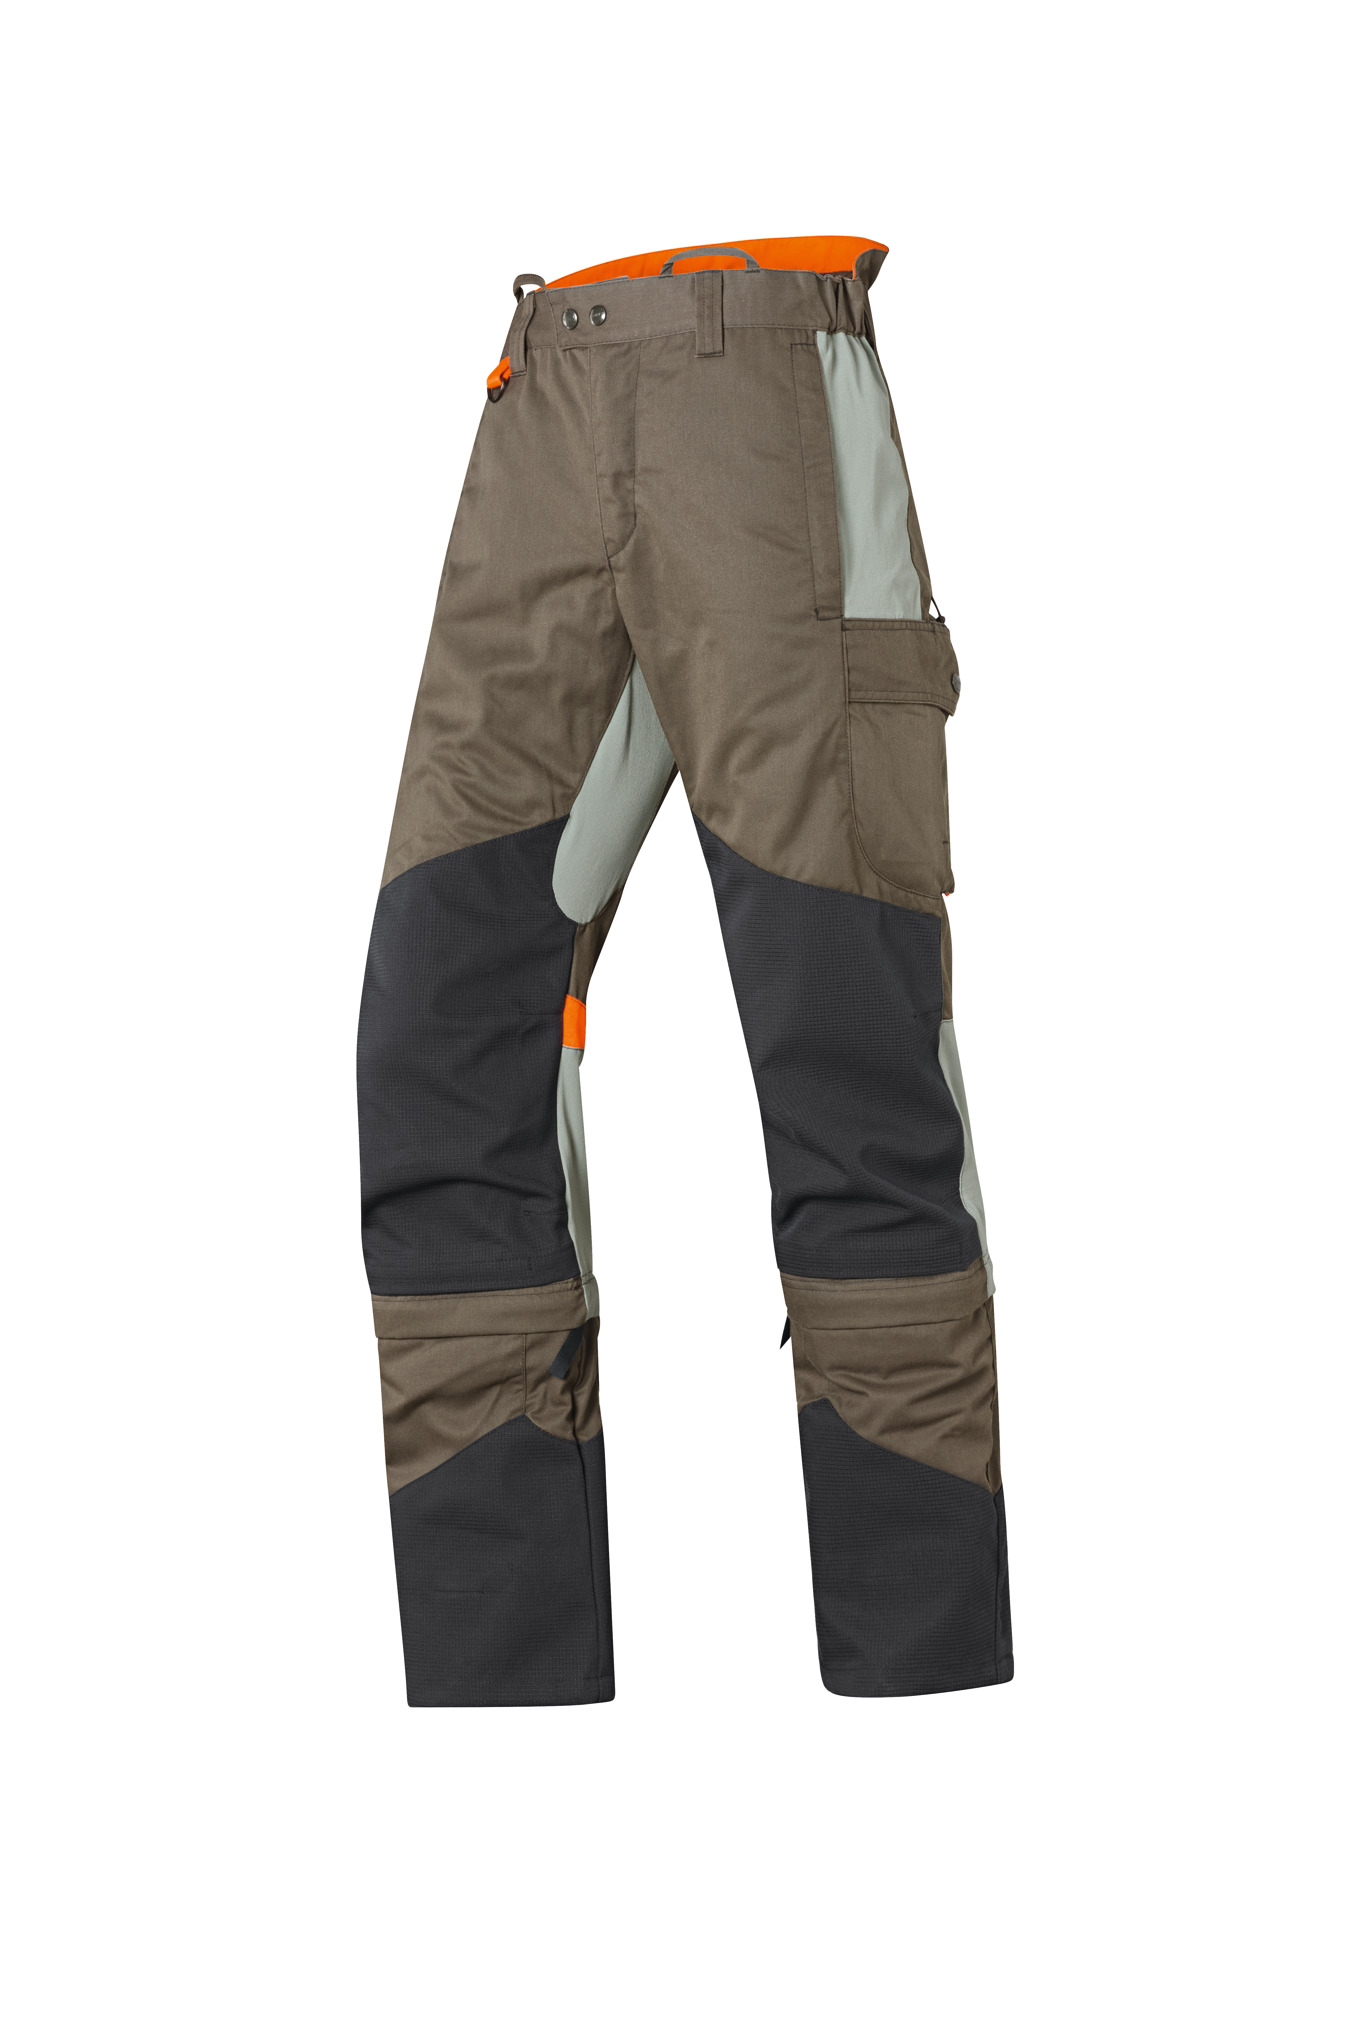 HS MULTIPROTECT protective trousers